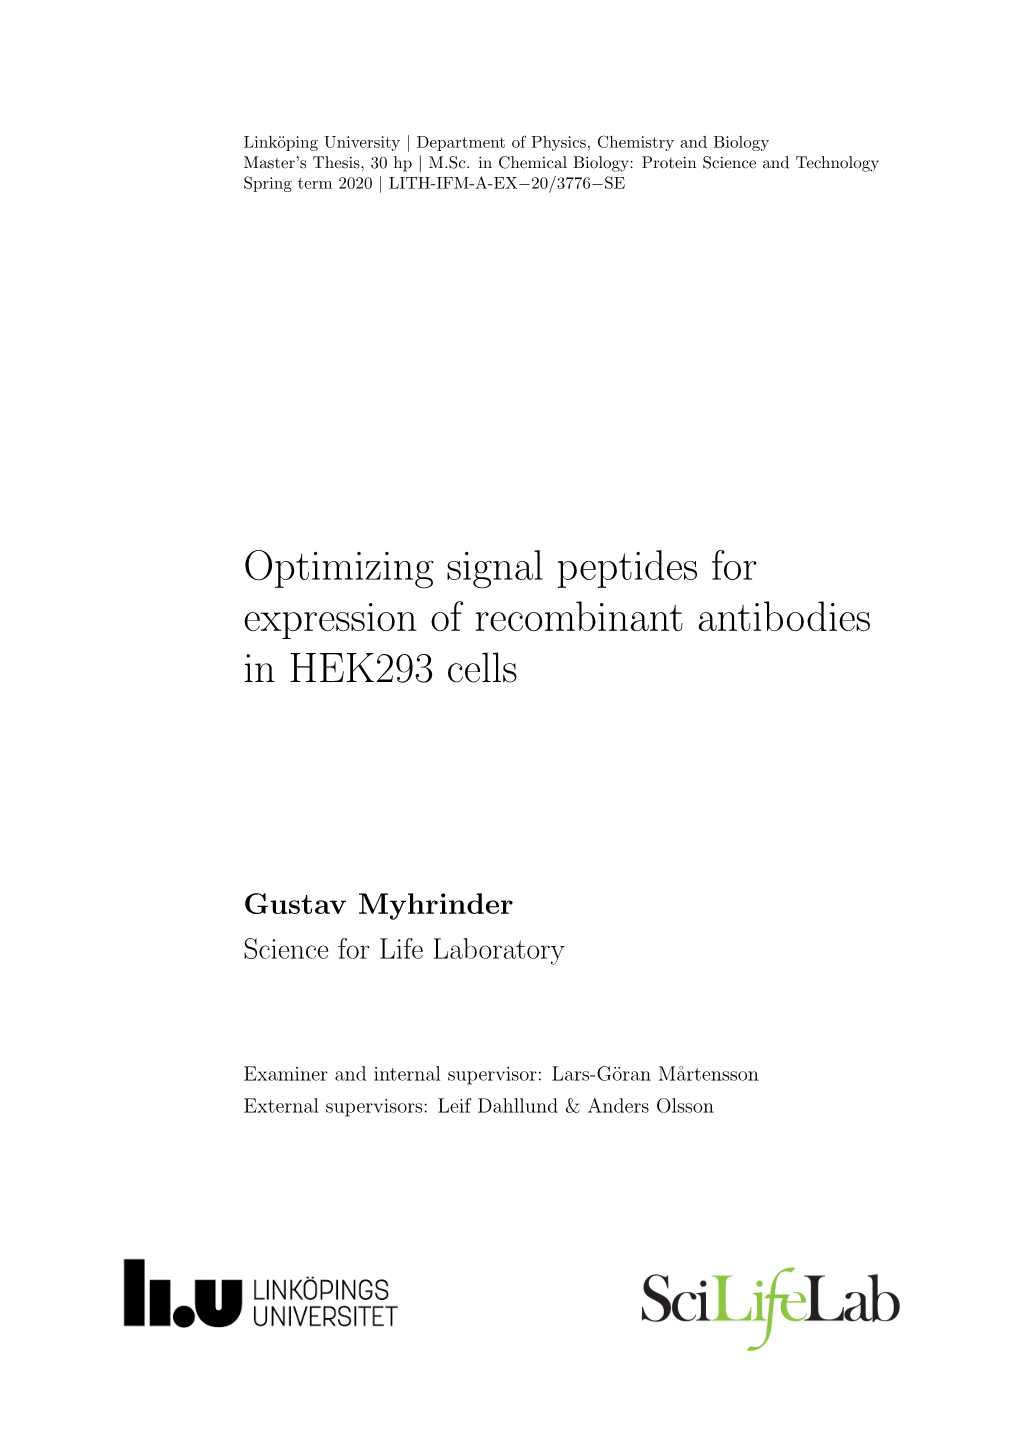 Optimizing Signal Peptides for Expression of Recombinant Antibodies in HEK293 Cells